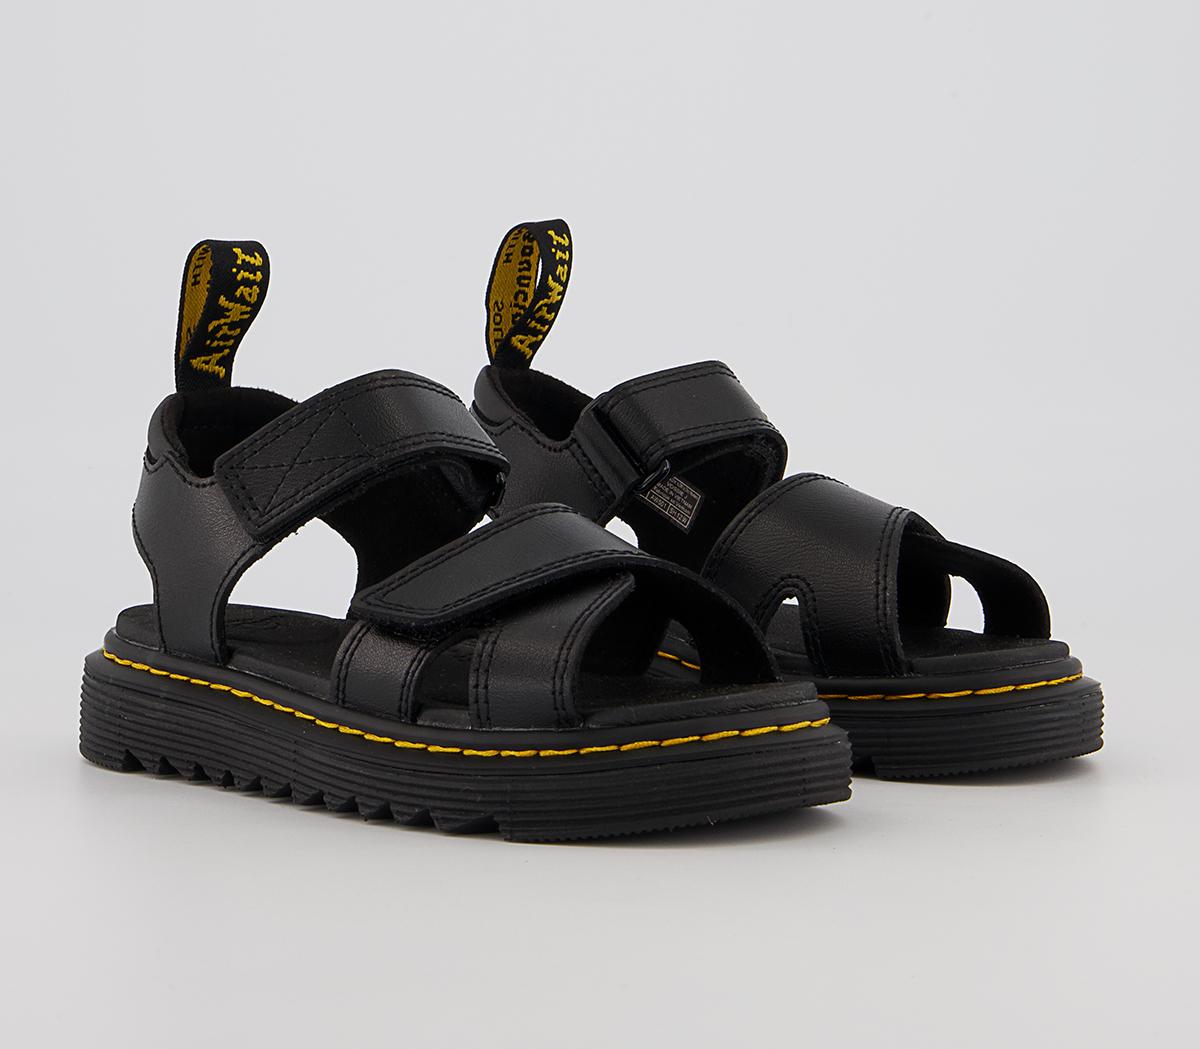 Dr. Martens Vossie Kids Sandals Black - Youth Trainers & Shoes